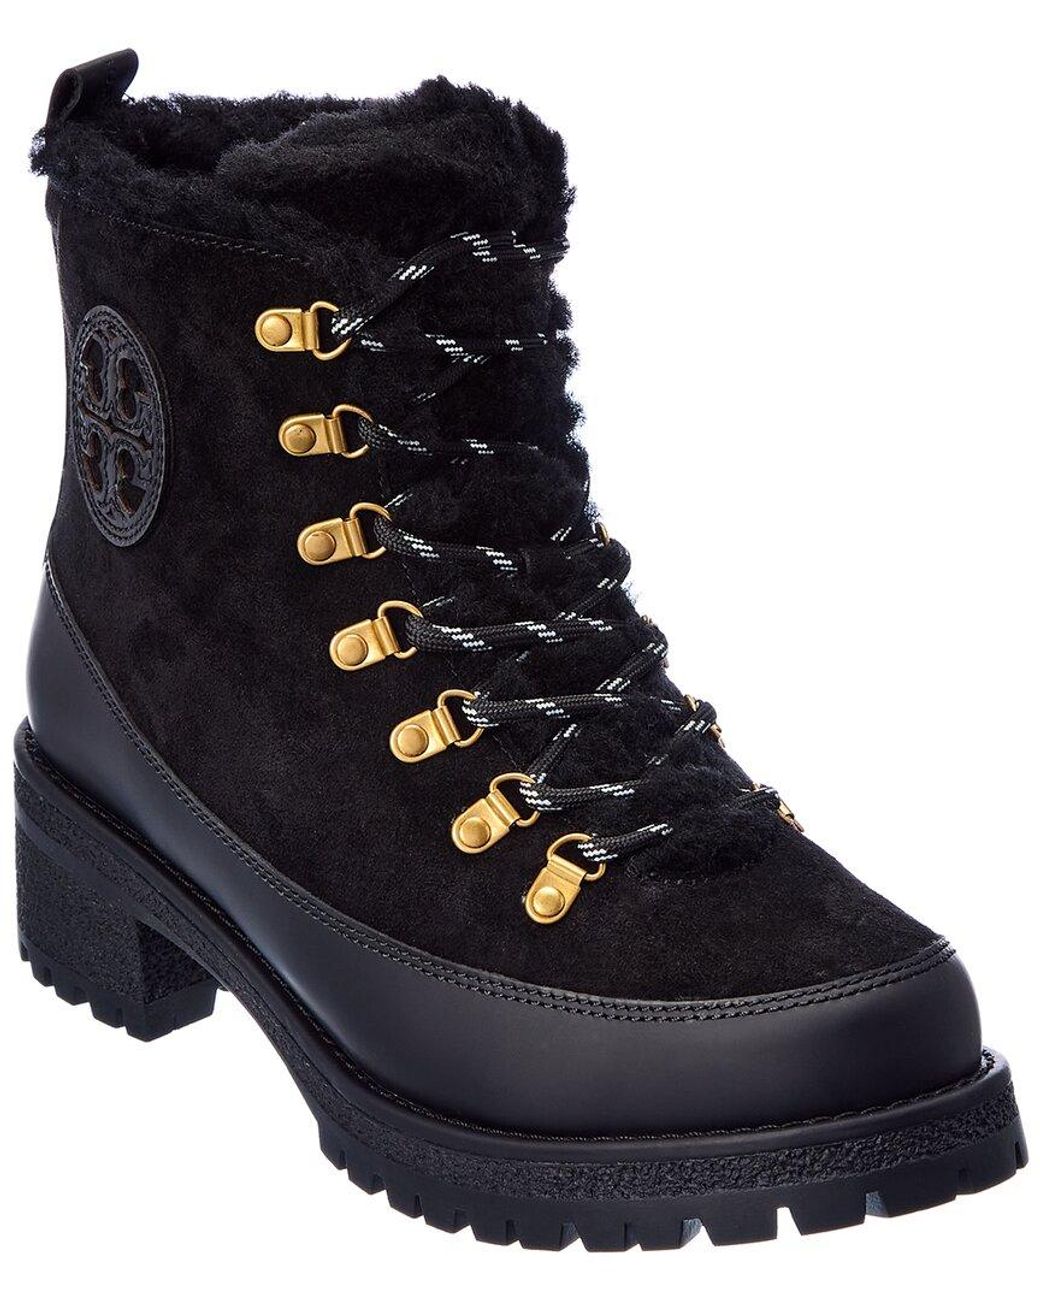 Tory Burch Thea Suede & Shearling Boot in Black | Lyst